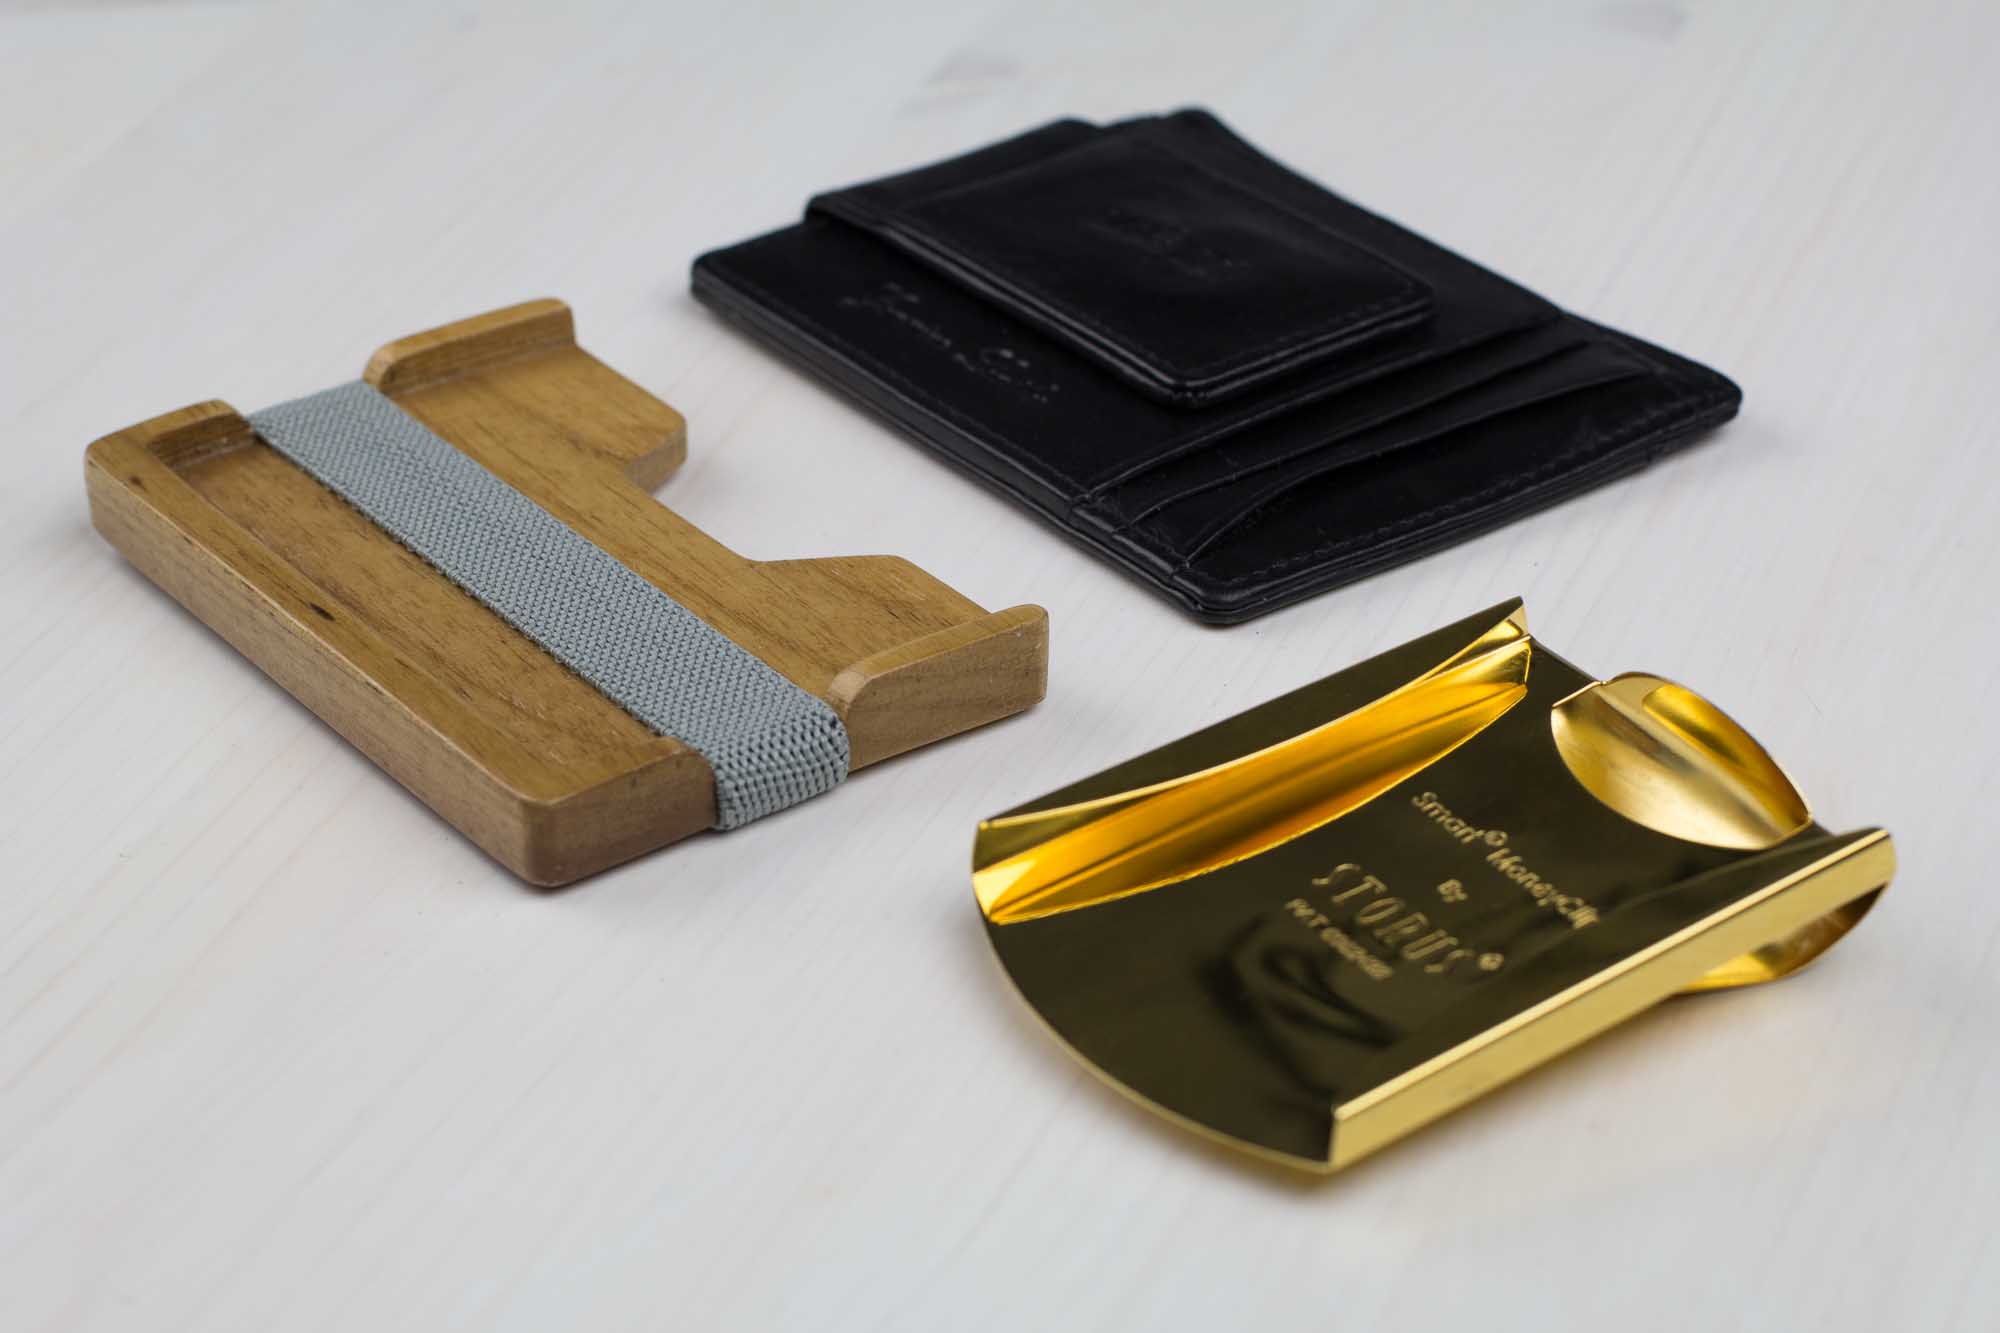 Cards and IDs|Gold Indiana University|Money Clip with Contemporary Metals Finish|Solid Brass|High Tension Clip to Securely Hold Cash 